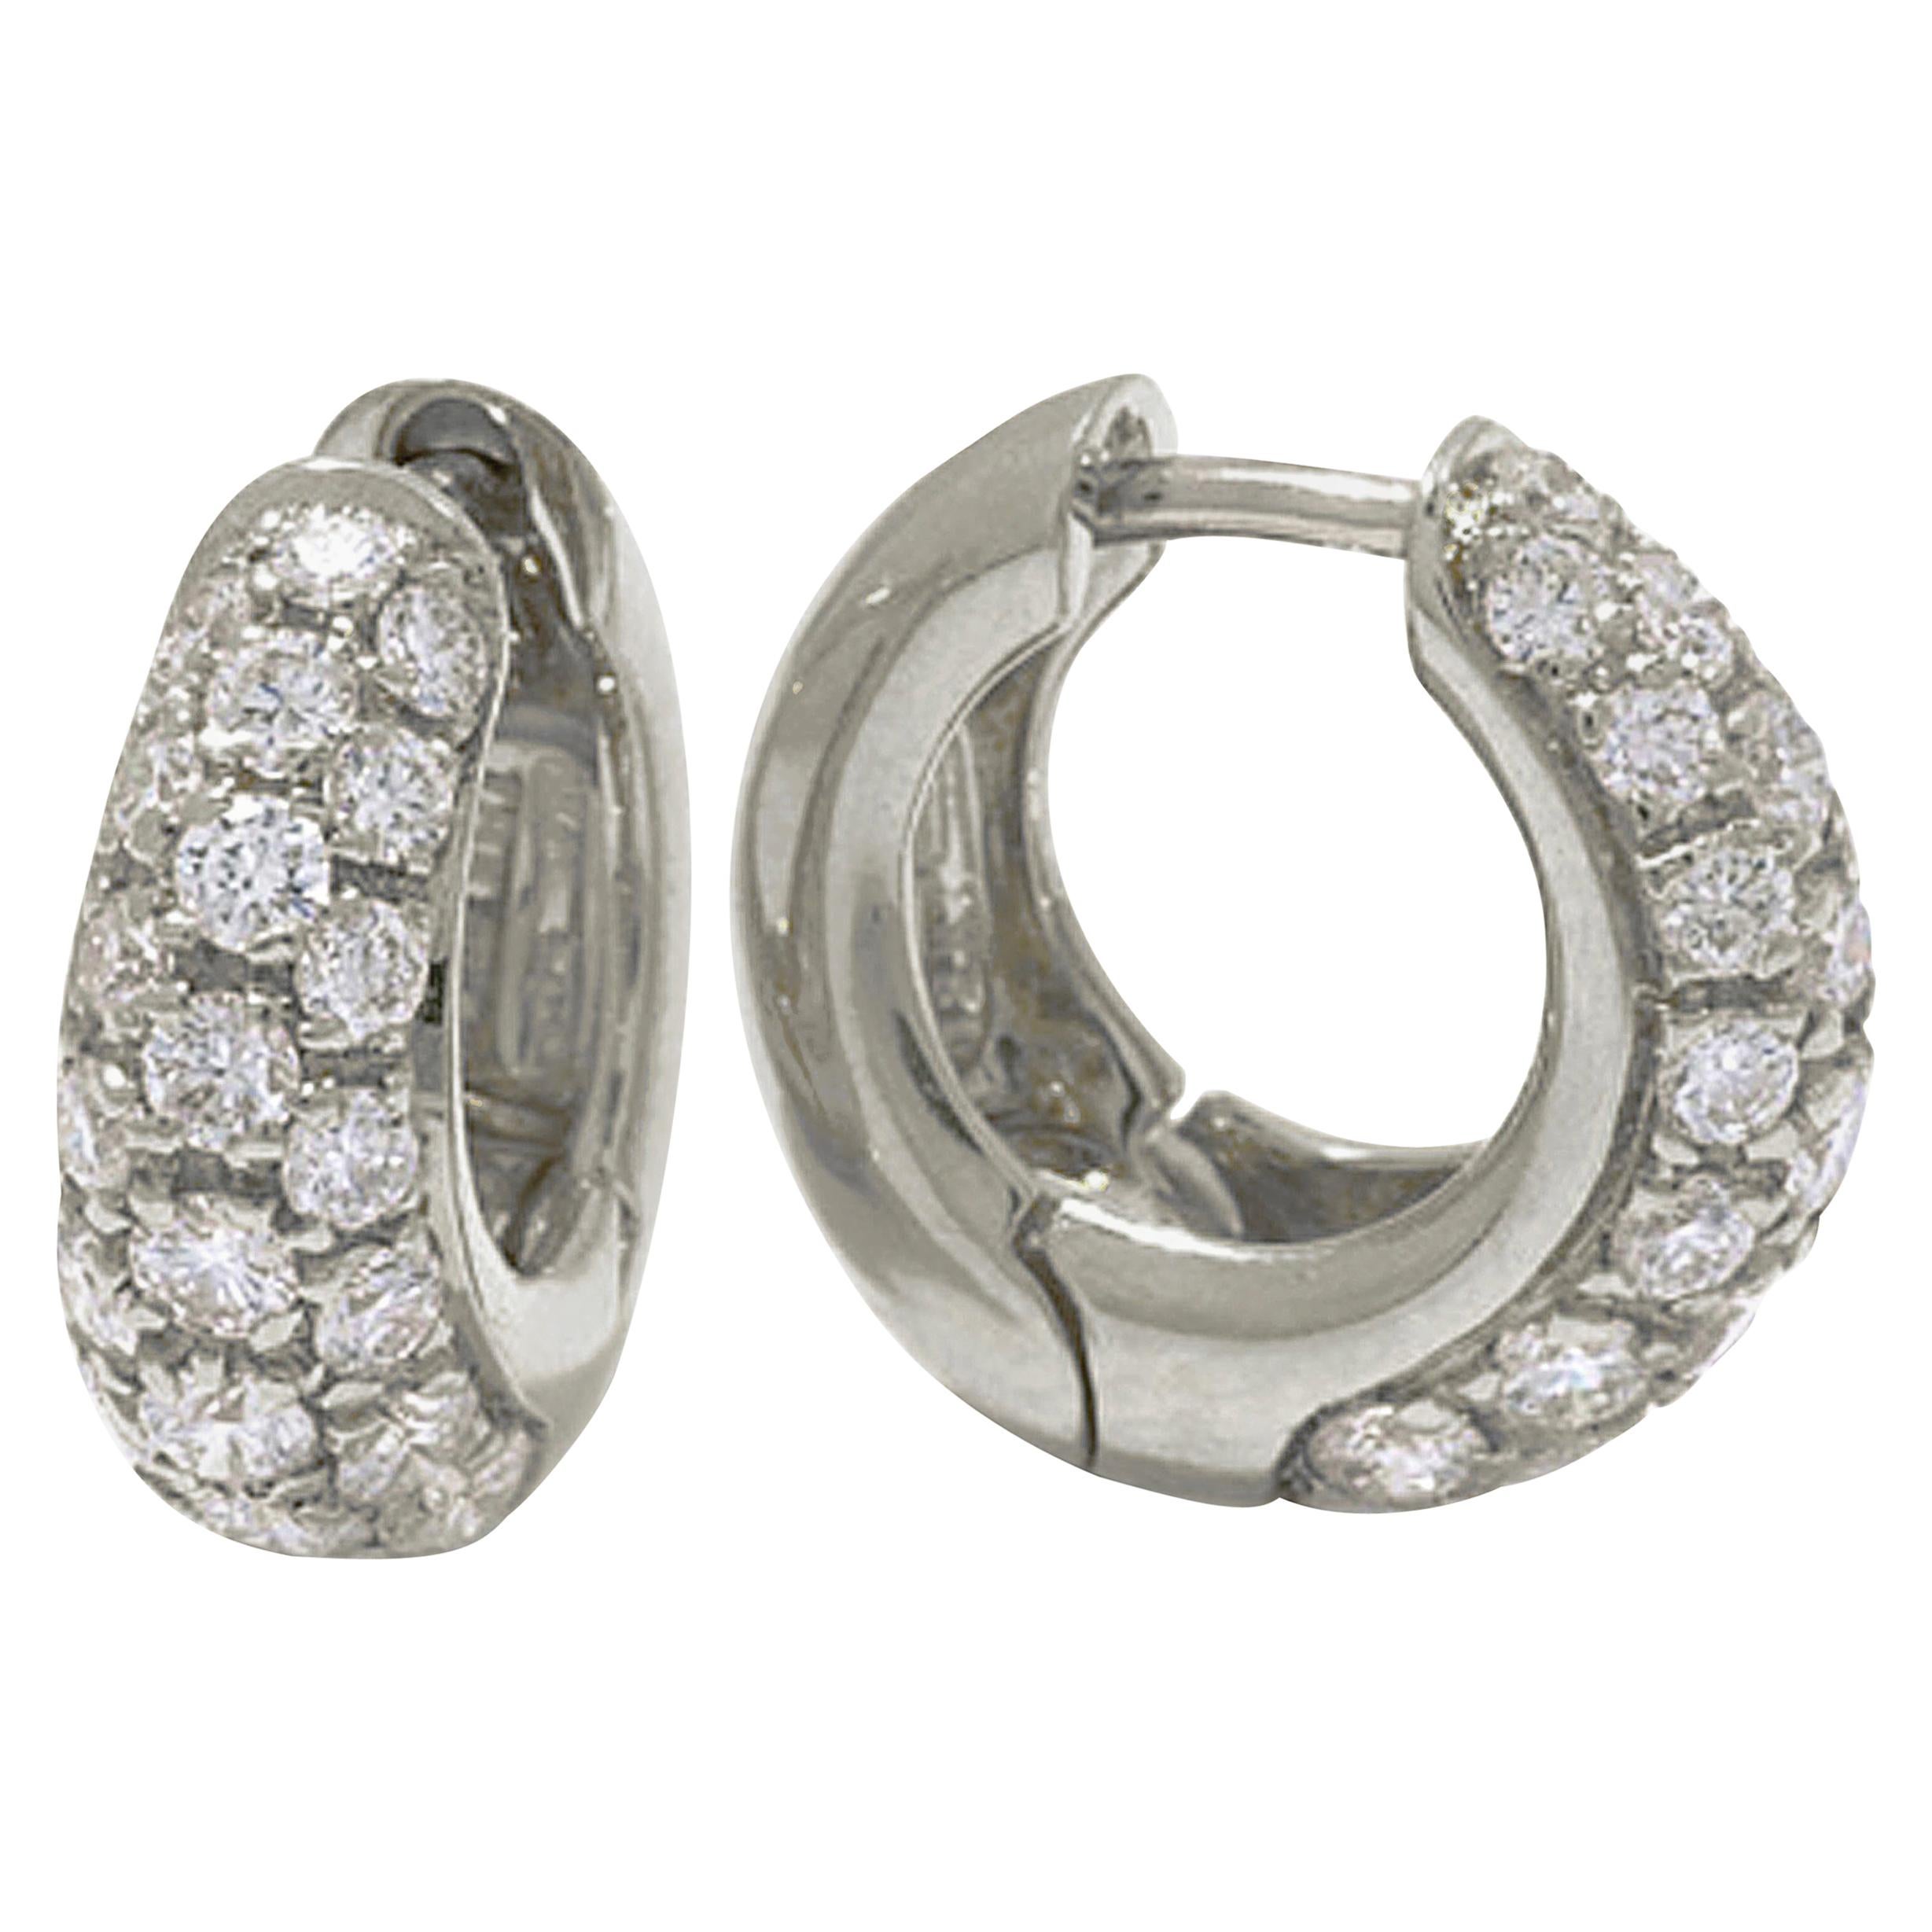 Look your best with these fashionable Pave' Shaped Huggie Earrings!
Crafted from 18-karat gold and set with brilliant white diamonds, these diamond huggies bring a sparkle of elegance and style to your everyday look.
Whether you're on a night out or